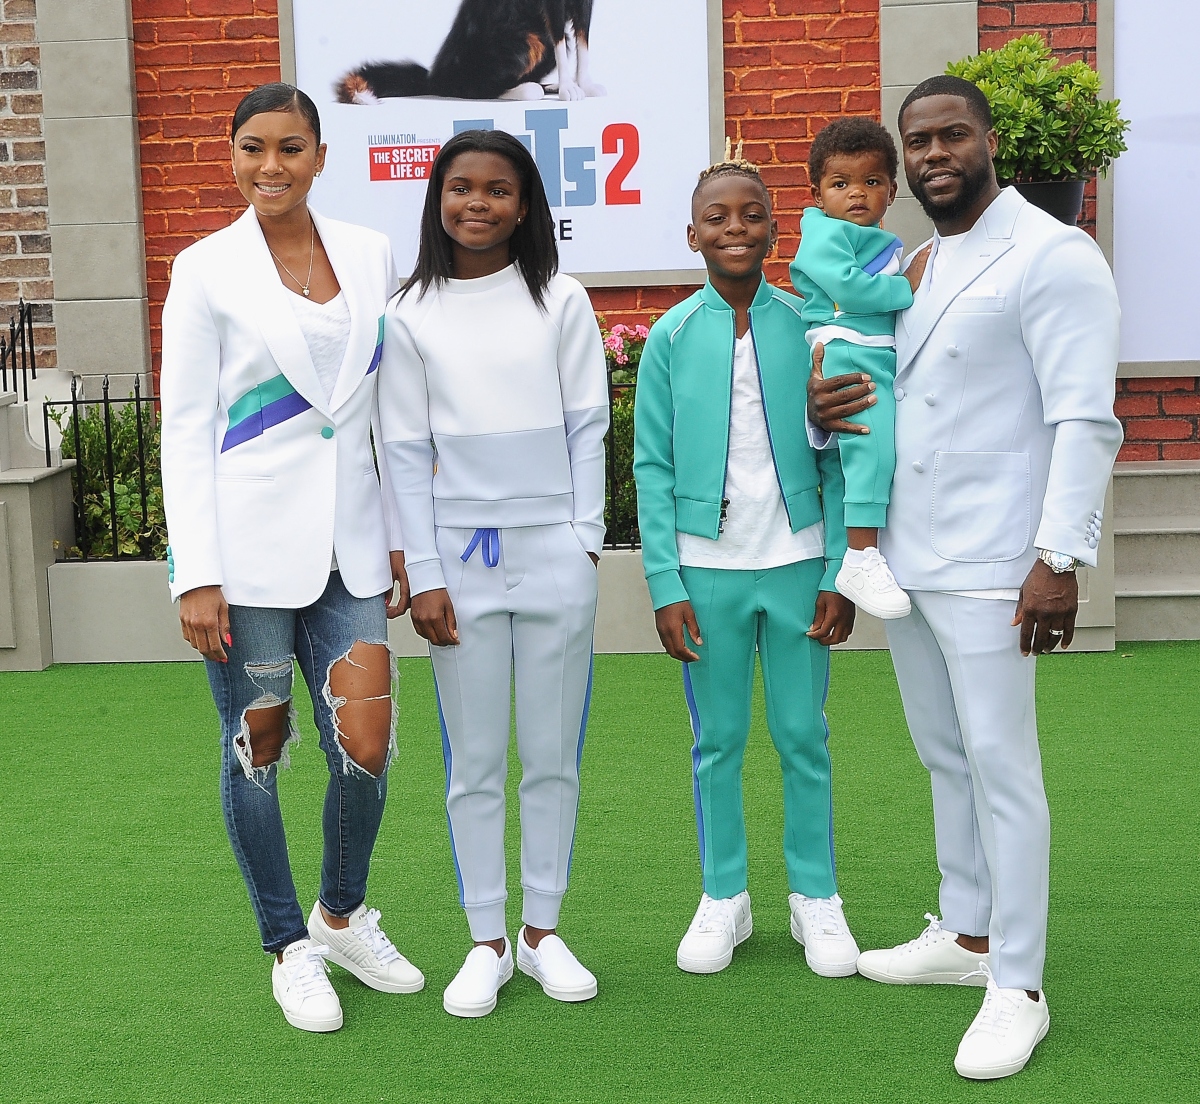 Eniko Parrish, Heaven Hart, Hendrix Hart, Kenzo Hart and Kevin Hart arrive for the premiere ‘The Secret Life Of Pets 2’ on June 2, 2019 in Westwood, California